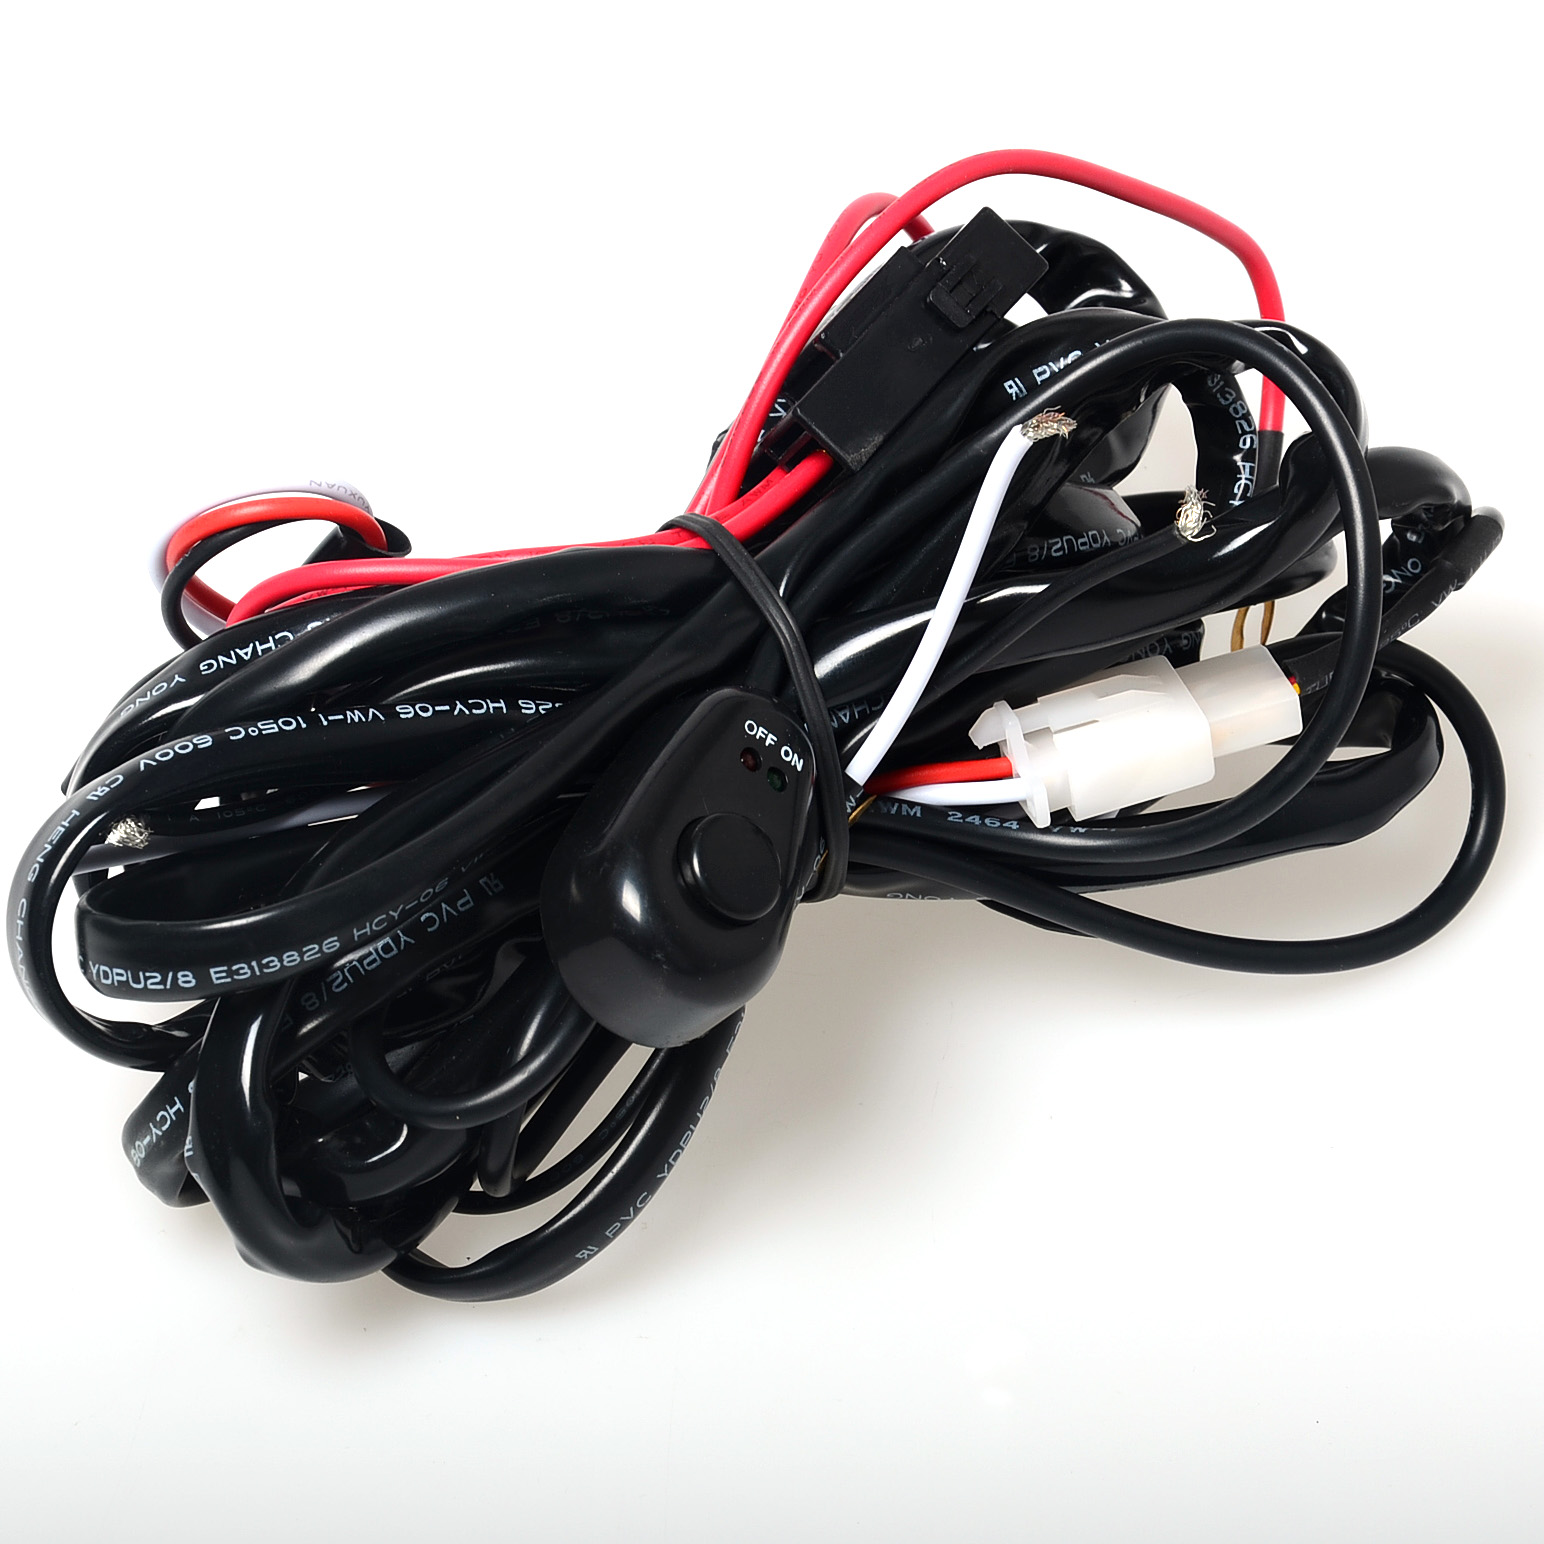 Kawell® 2 Leg Wiring Harness Include Switch Kit Support 120w LED light Wiring Harness and Switch